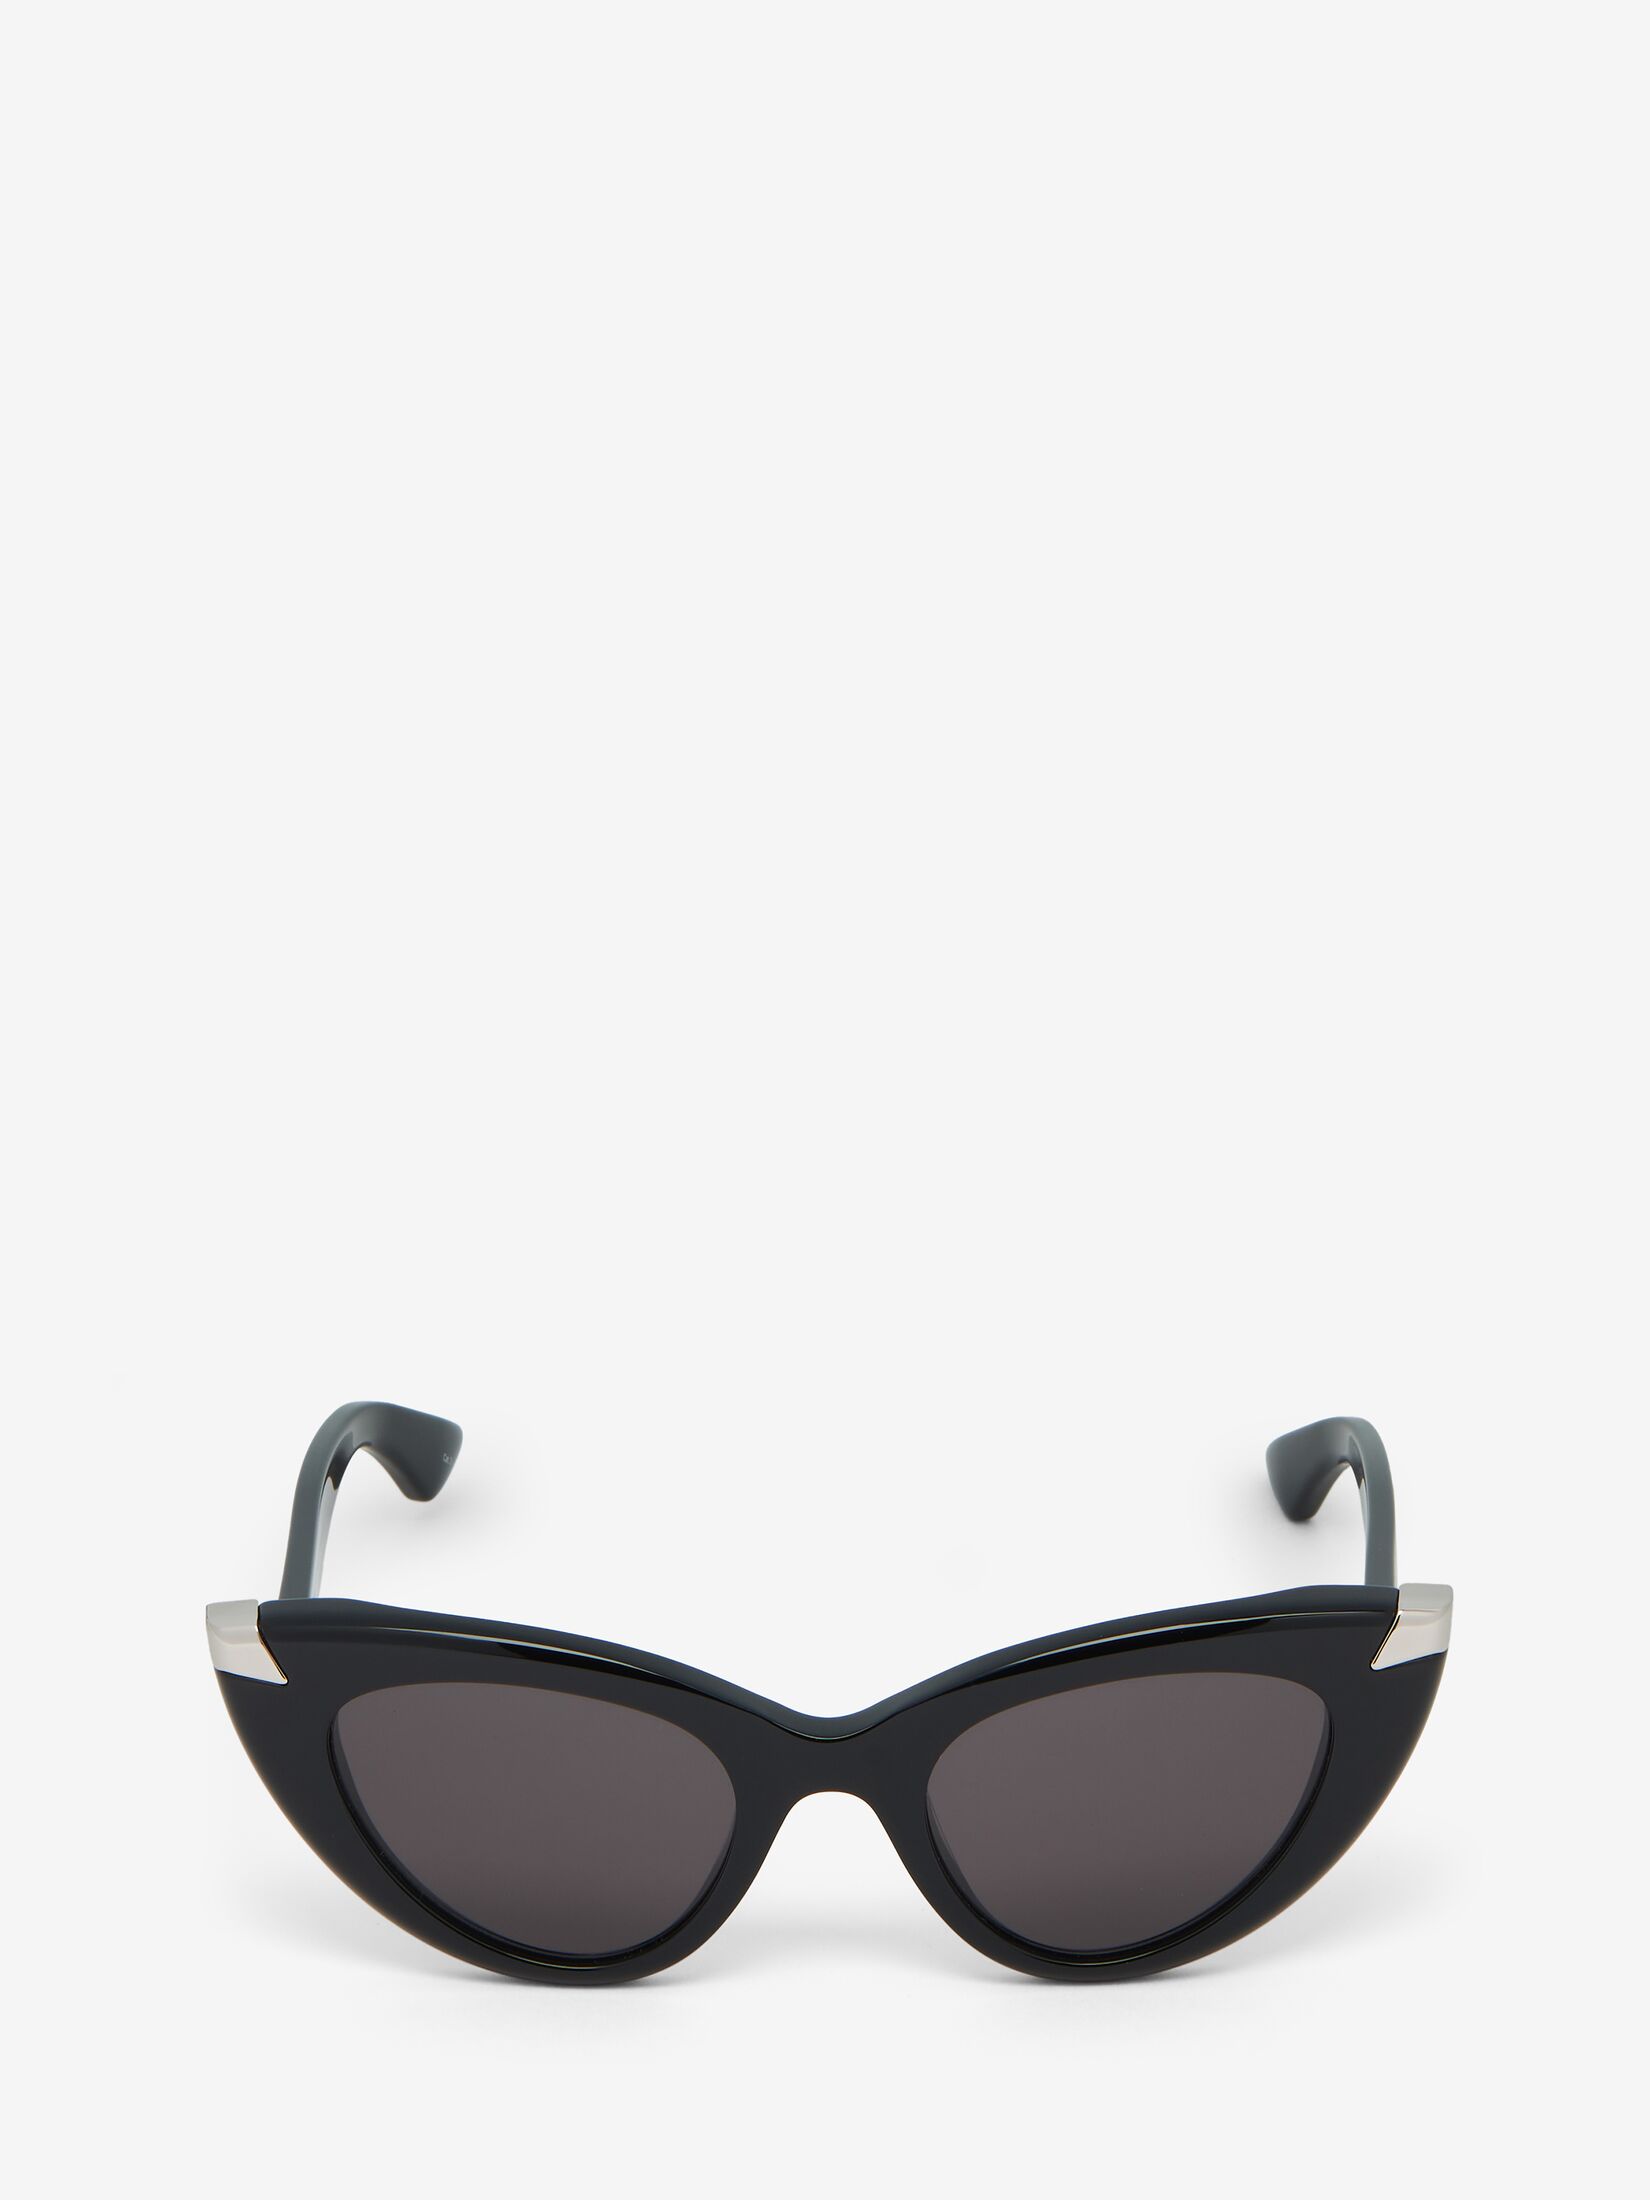 Womens Sunglasses: Buy Womens Sunglasses online at best prices in